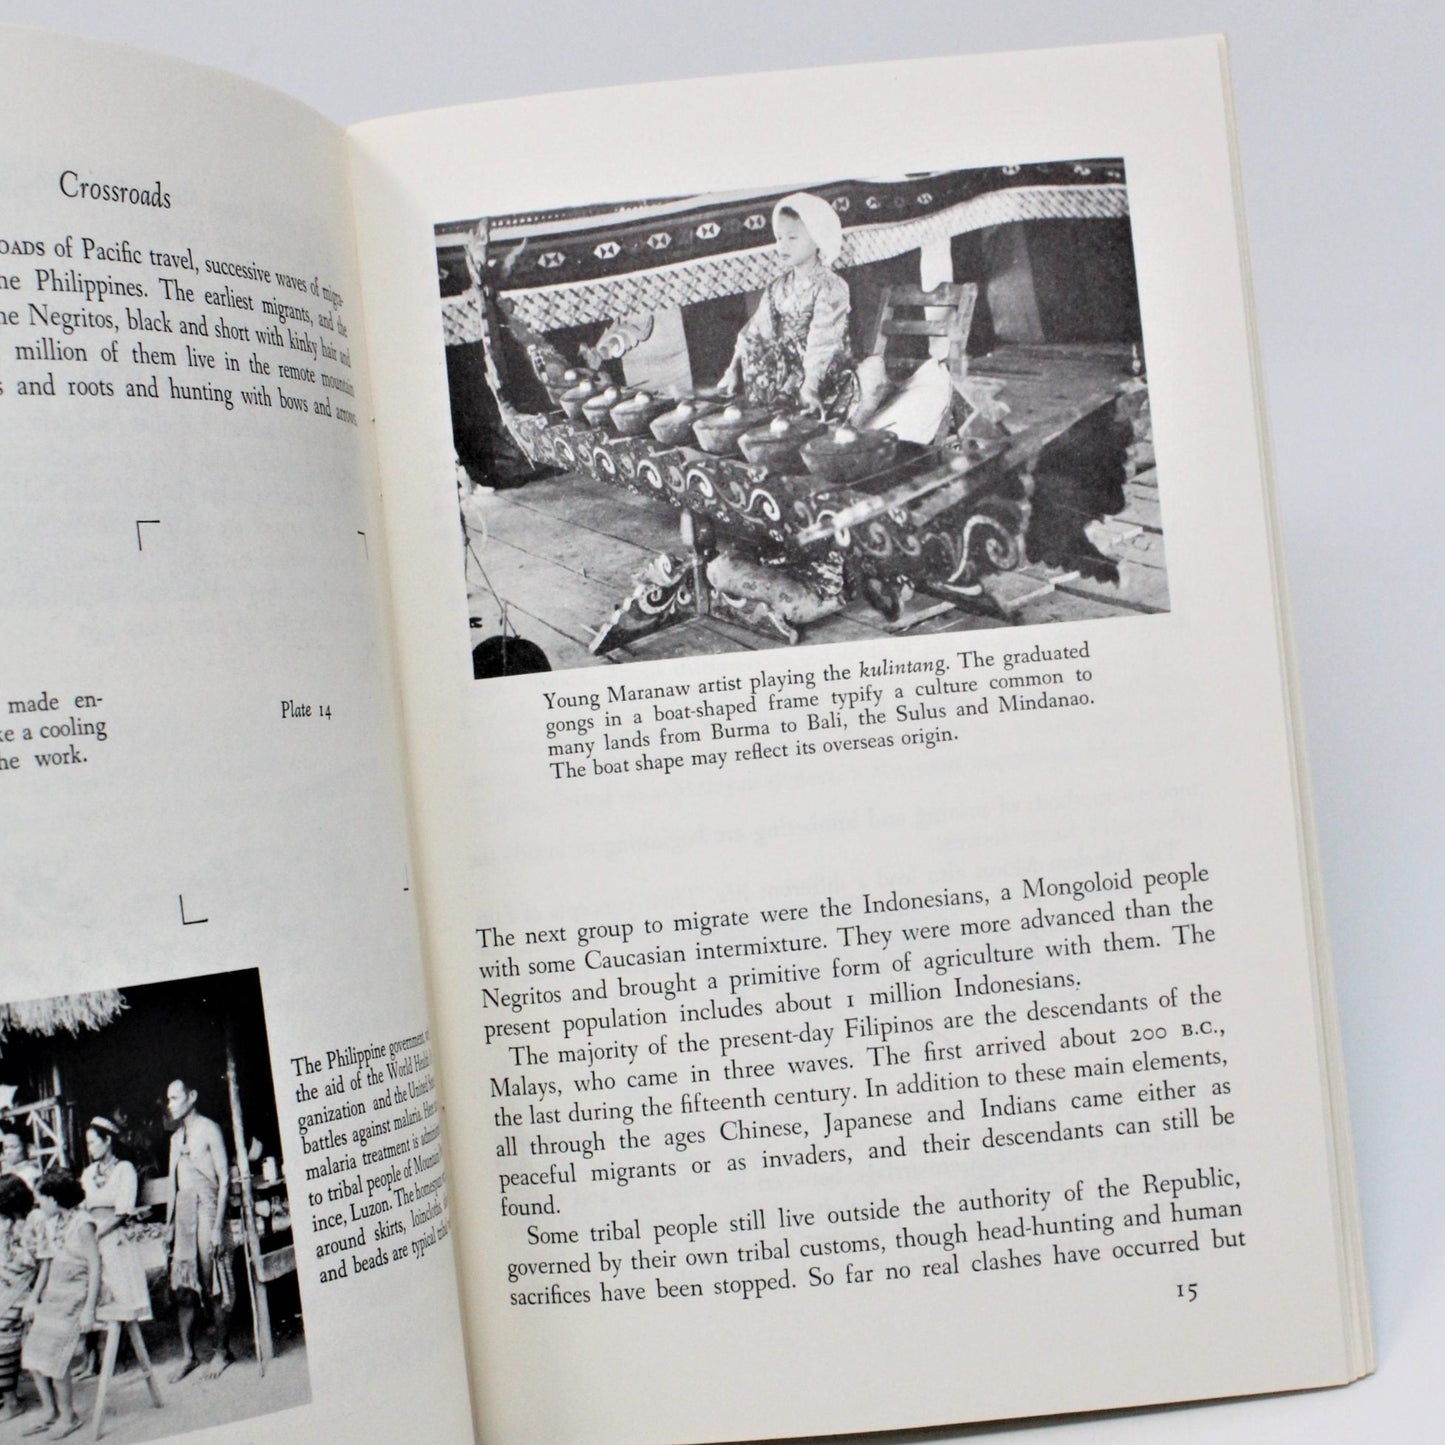 Travel Book, Geographical Society Around the World, Philippine Islands, 1966